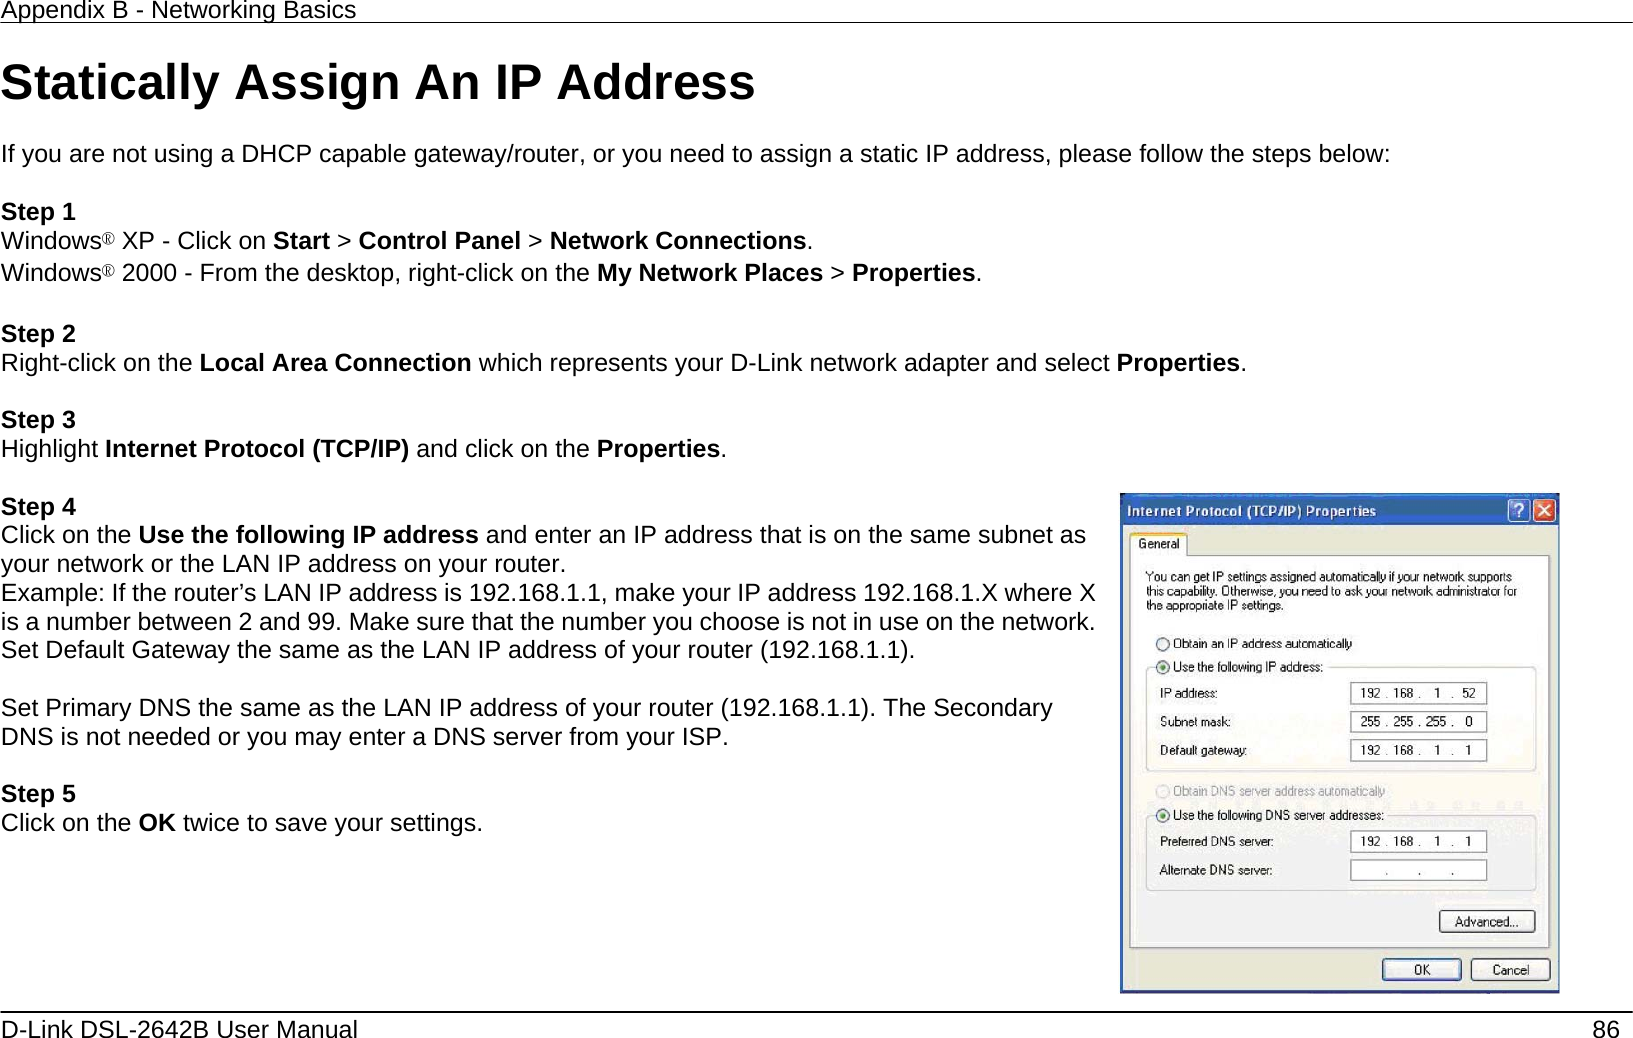 Appendix B - Networking Basics   D-Link DSL-2642B User Manual    86 Statically Assign An IP Address  If you are not using a DHCP capable gateway/router, or you need to assign a static IP address, please follow the steps below:  Step 1 Windows® XP - Click on Start &gt; Control Panel &gt; Network Connections. Windows® 2000 - From the desktop, right-click on the My Network Places &gt; Properties.  Step 2 Right-click on the Local Area Connection which represents your D-Link network adapter and select Properties.  Step 3 Highlight Internet Protocol (TCP/IP) and click on the Properties.  Step 4 Click on the Use the following IP address and enter an IP address that is on the same subnet as your network or the LAN IP address on your router. Example: If the router’s LAN IP address is 192.168.1.1, make your IP address 192.168.1.X where X is a number between 2 and 99. Make sure that the number you choose is not in use on the network. Set Default Gateway the same as the LAN IP address of your router (192.168.1.1).  Set Primary DNS the same as the LAN IP address of your router (192.168.1.1). The Secondary DNS is not needed or you may enter a DNS server from your ISP.  Step 5 Click on the OK twice to save your settings.   